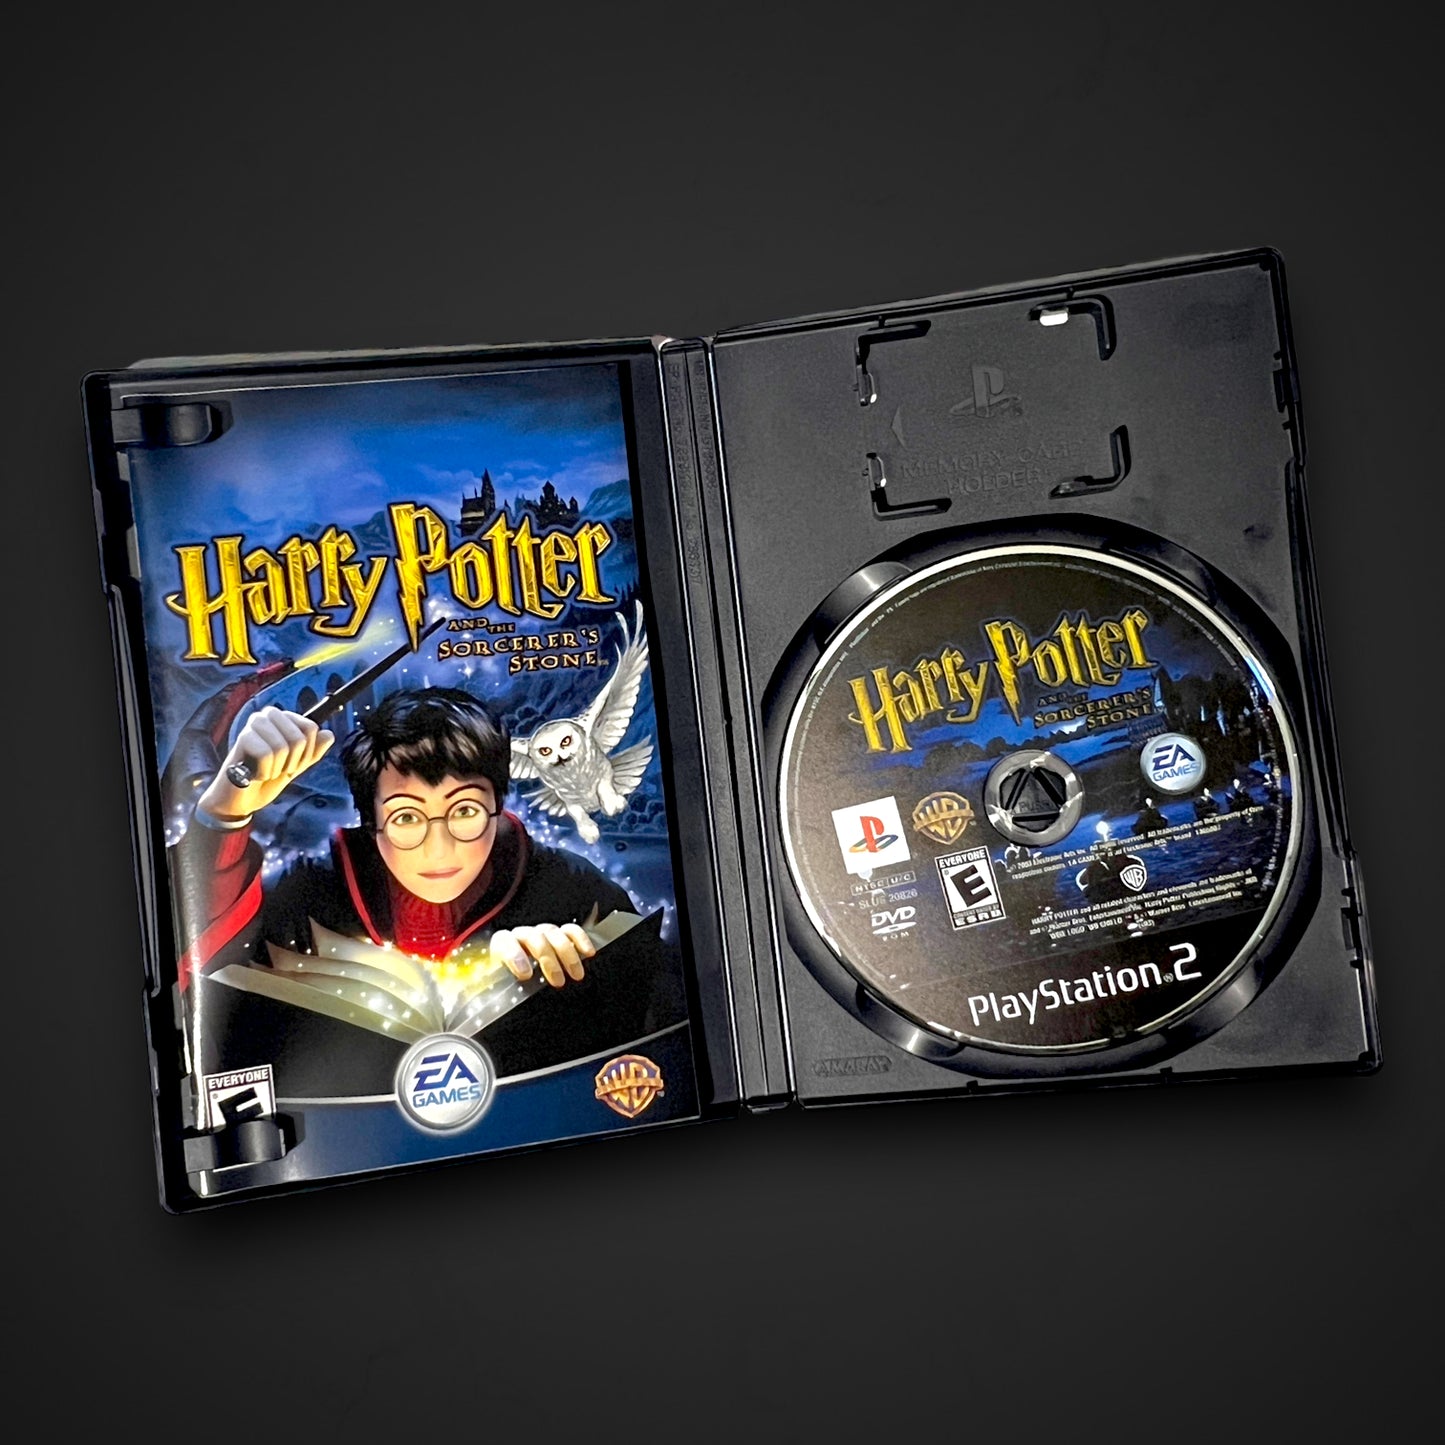 Harry Potter and the Sorcerer's Stone (Sony PlayStation 2, 2003)